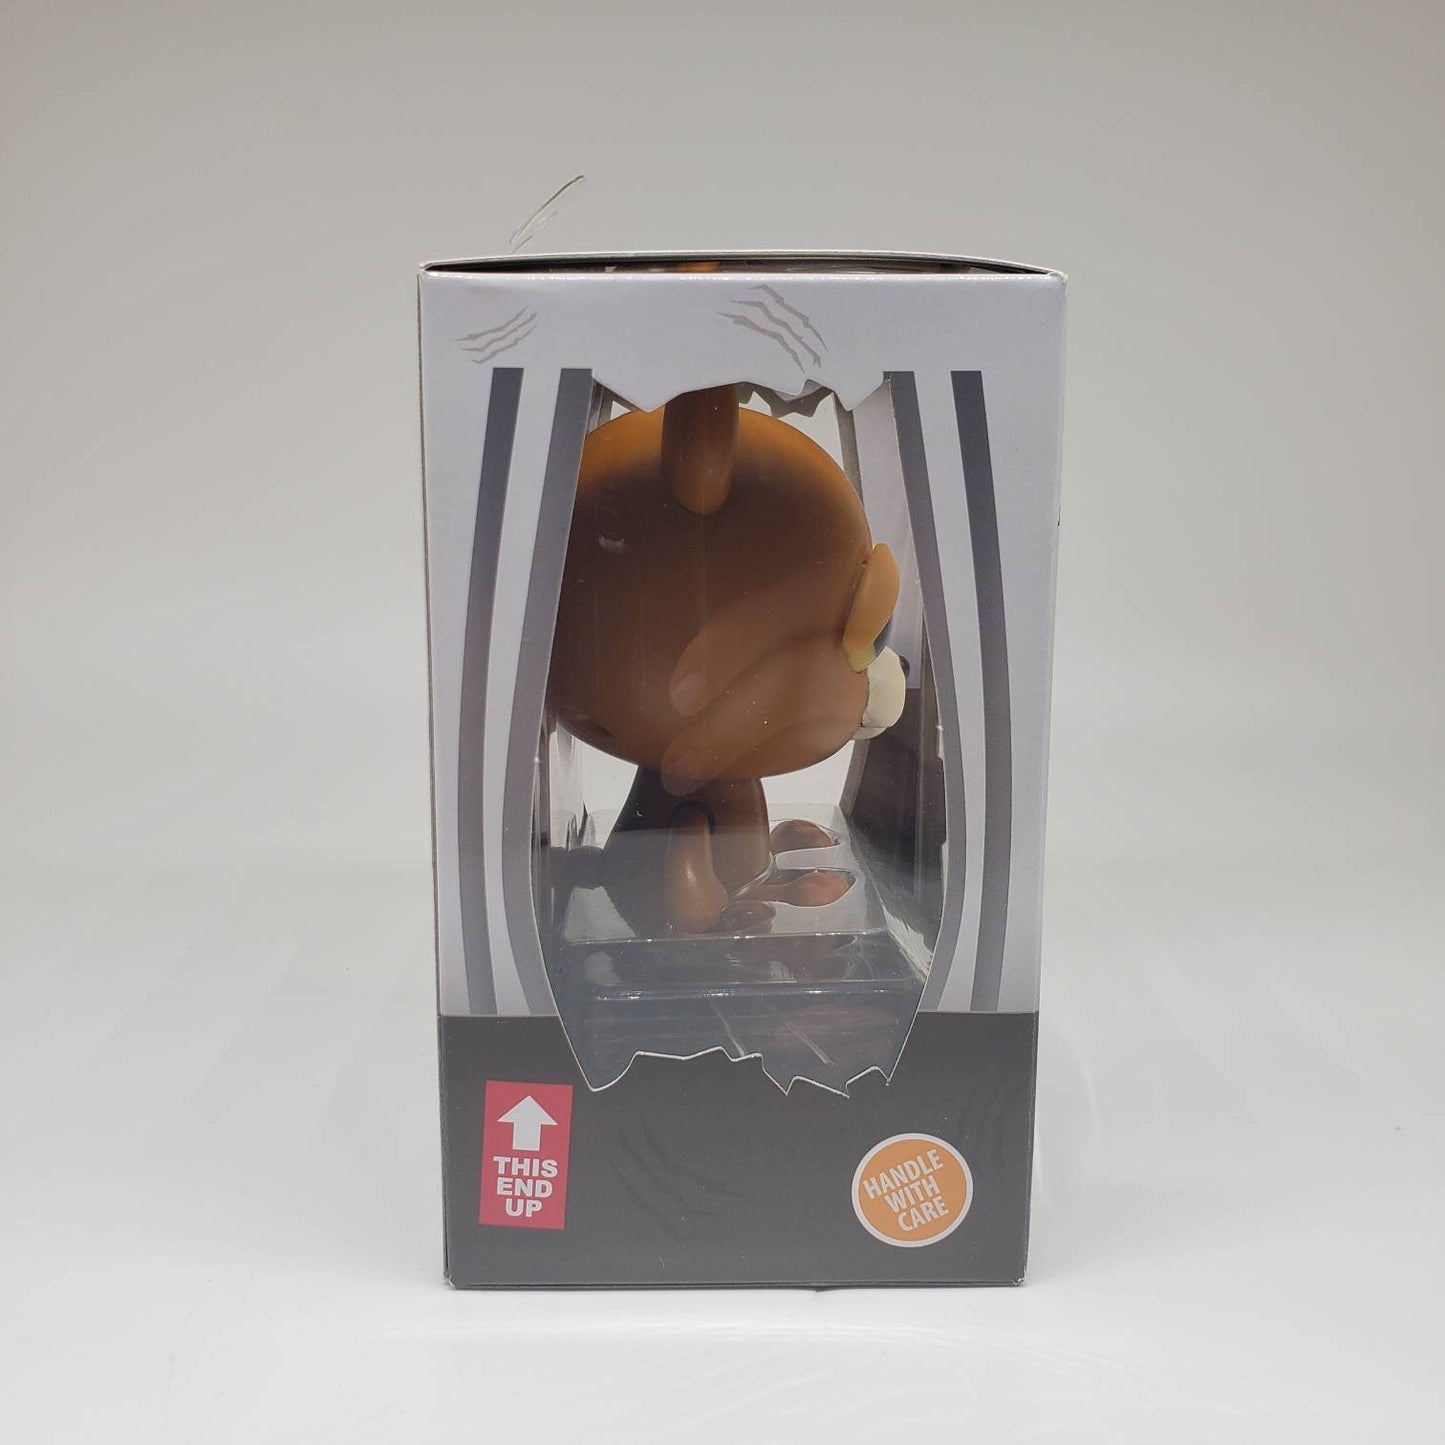 Sir Growls A Lot Bear Cub Brown Feisty Pets Collectable Vinyl Figure Animal Toy Figurine